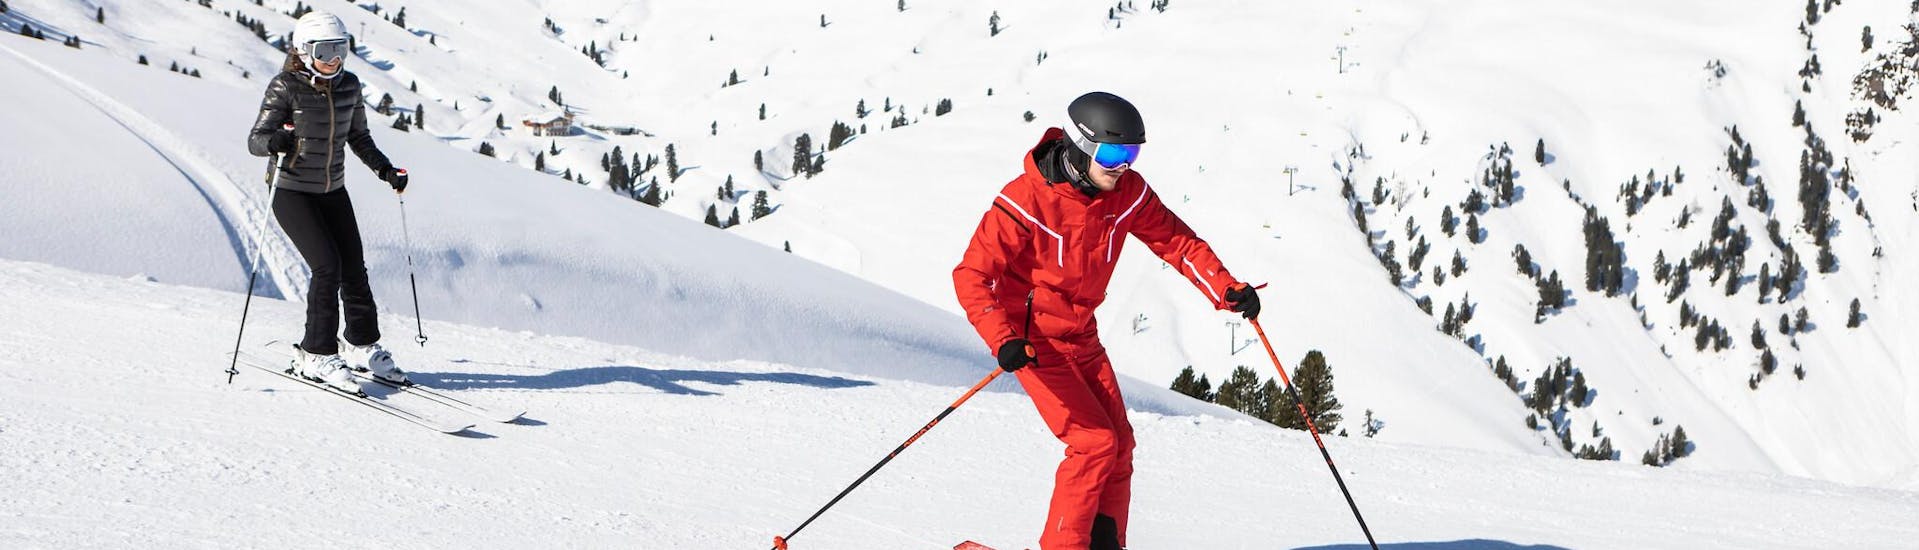 A skier practices the correct skiing technique during one of the private lessons in Valais.